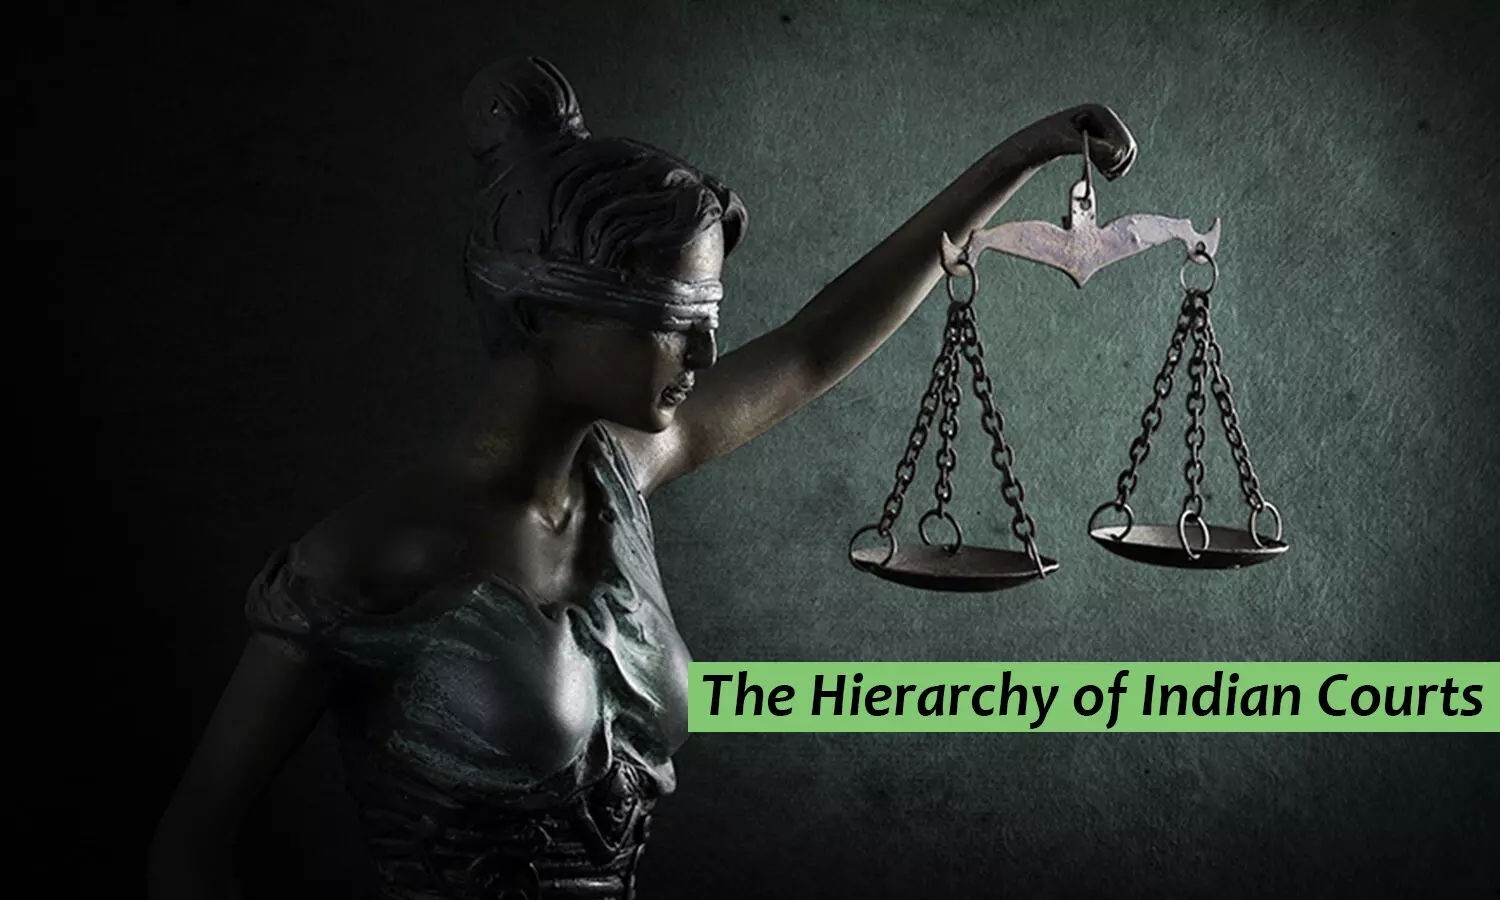 The Hierarchy of Indian Courts